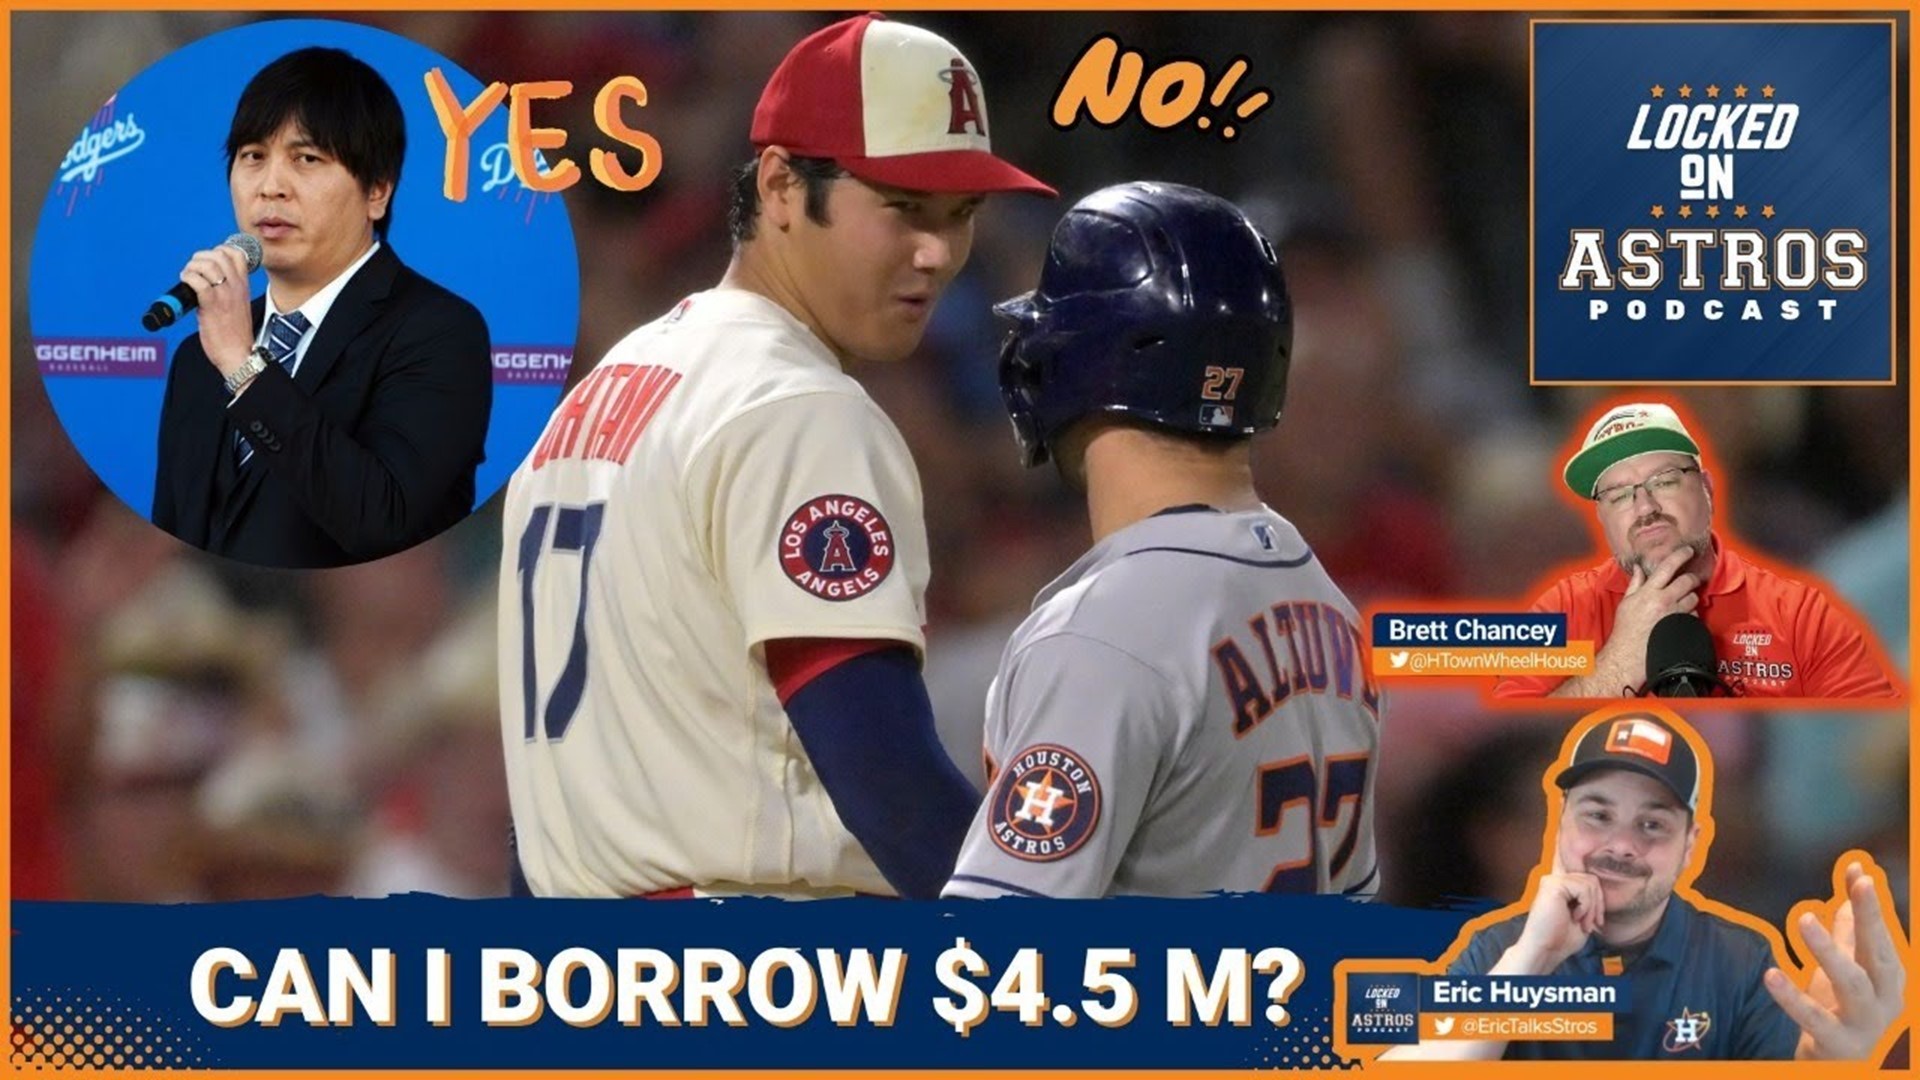 Astros long-time rival Shohei Ohtani b-word controversy!